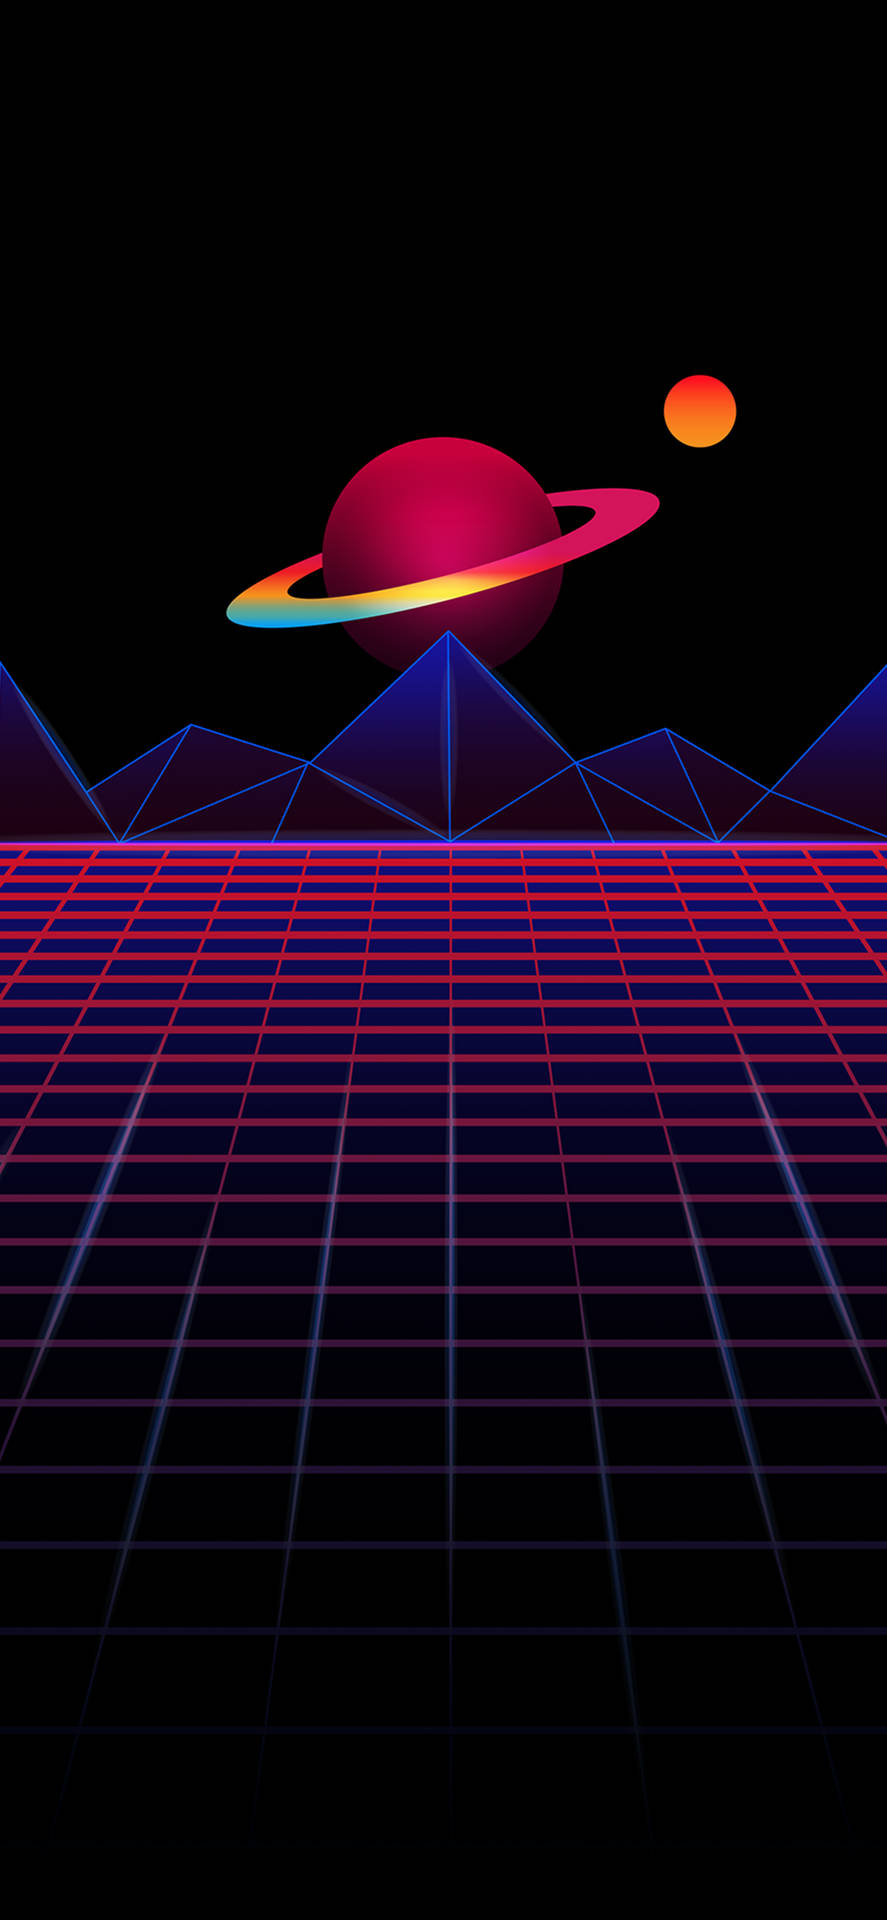 Synthwave Iphone Amoled Wallpaper